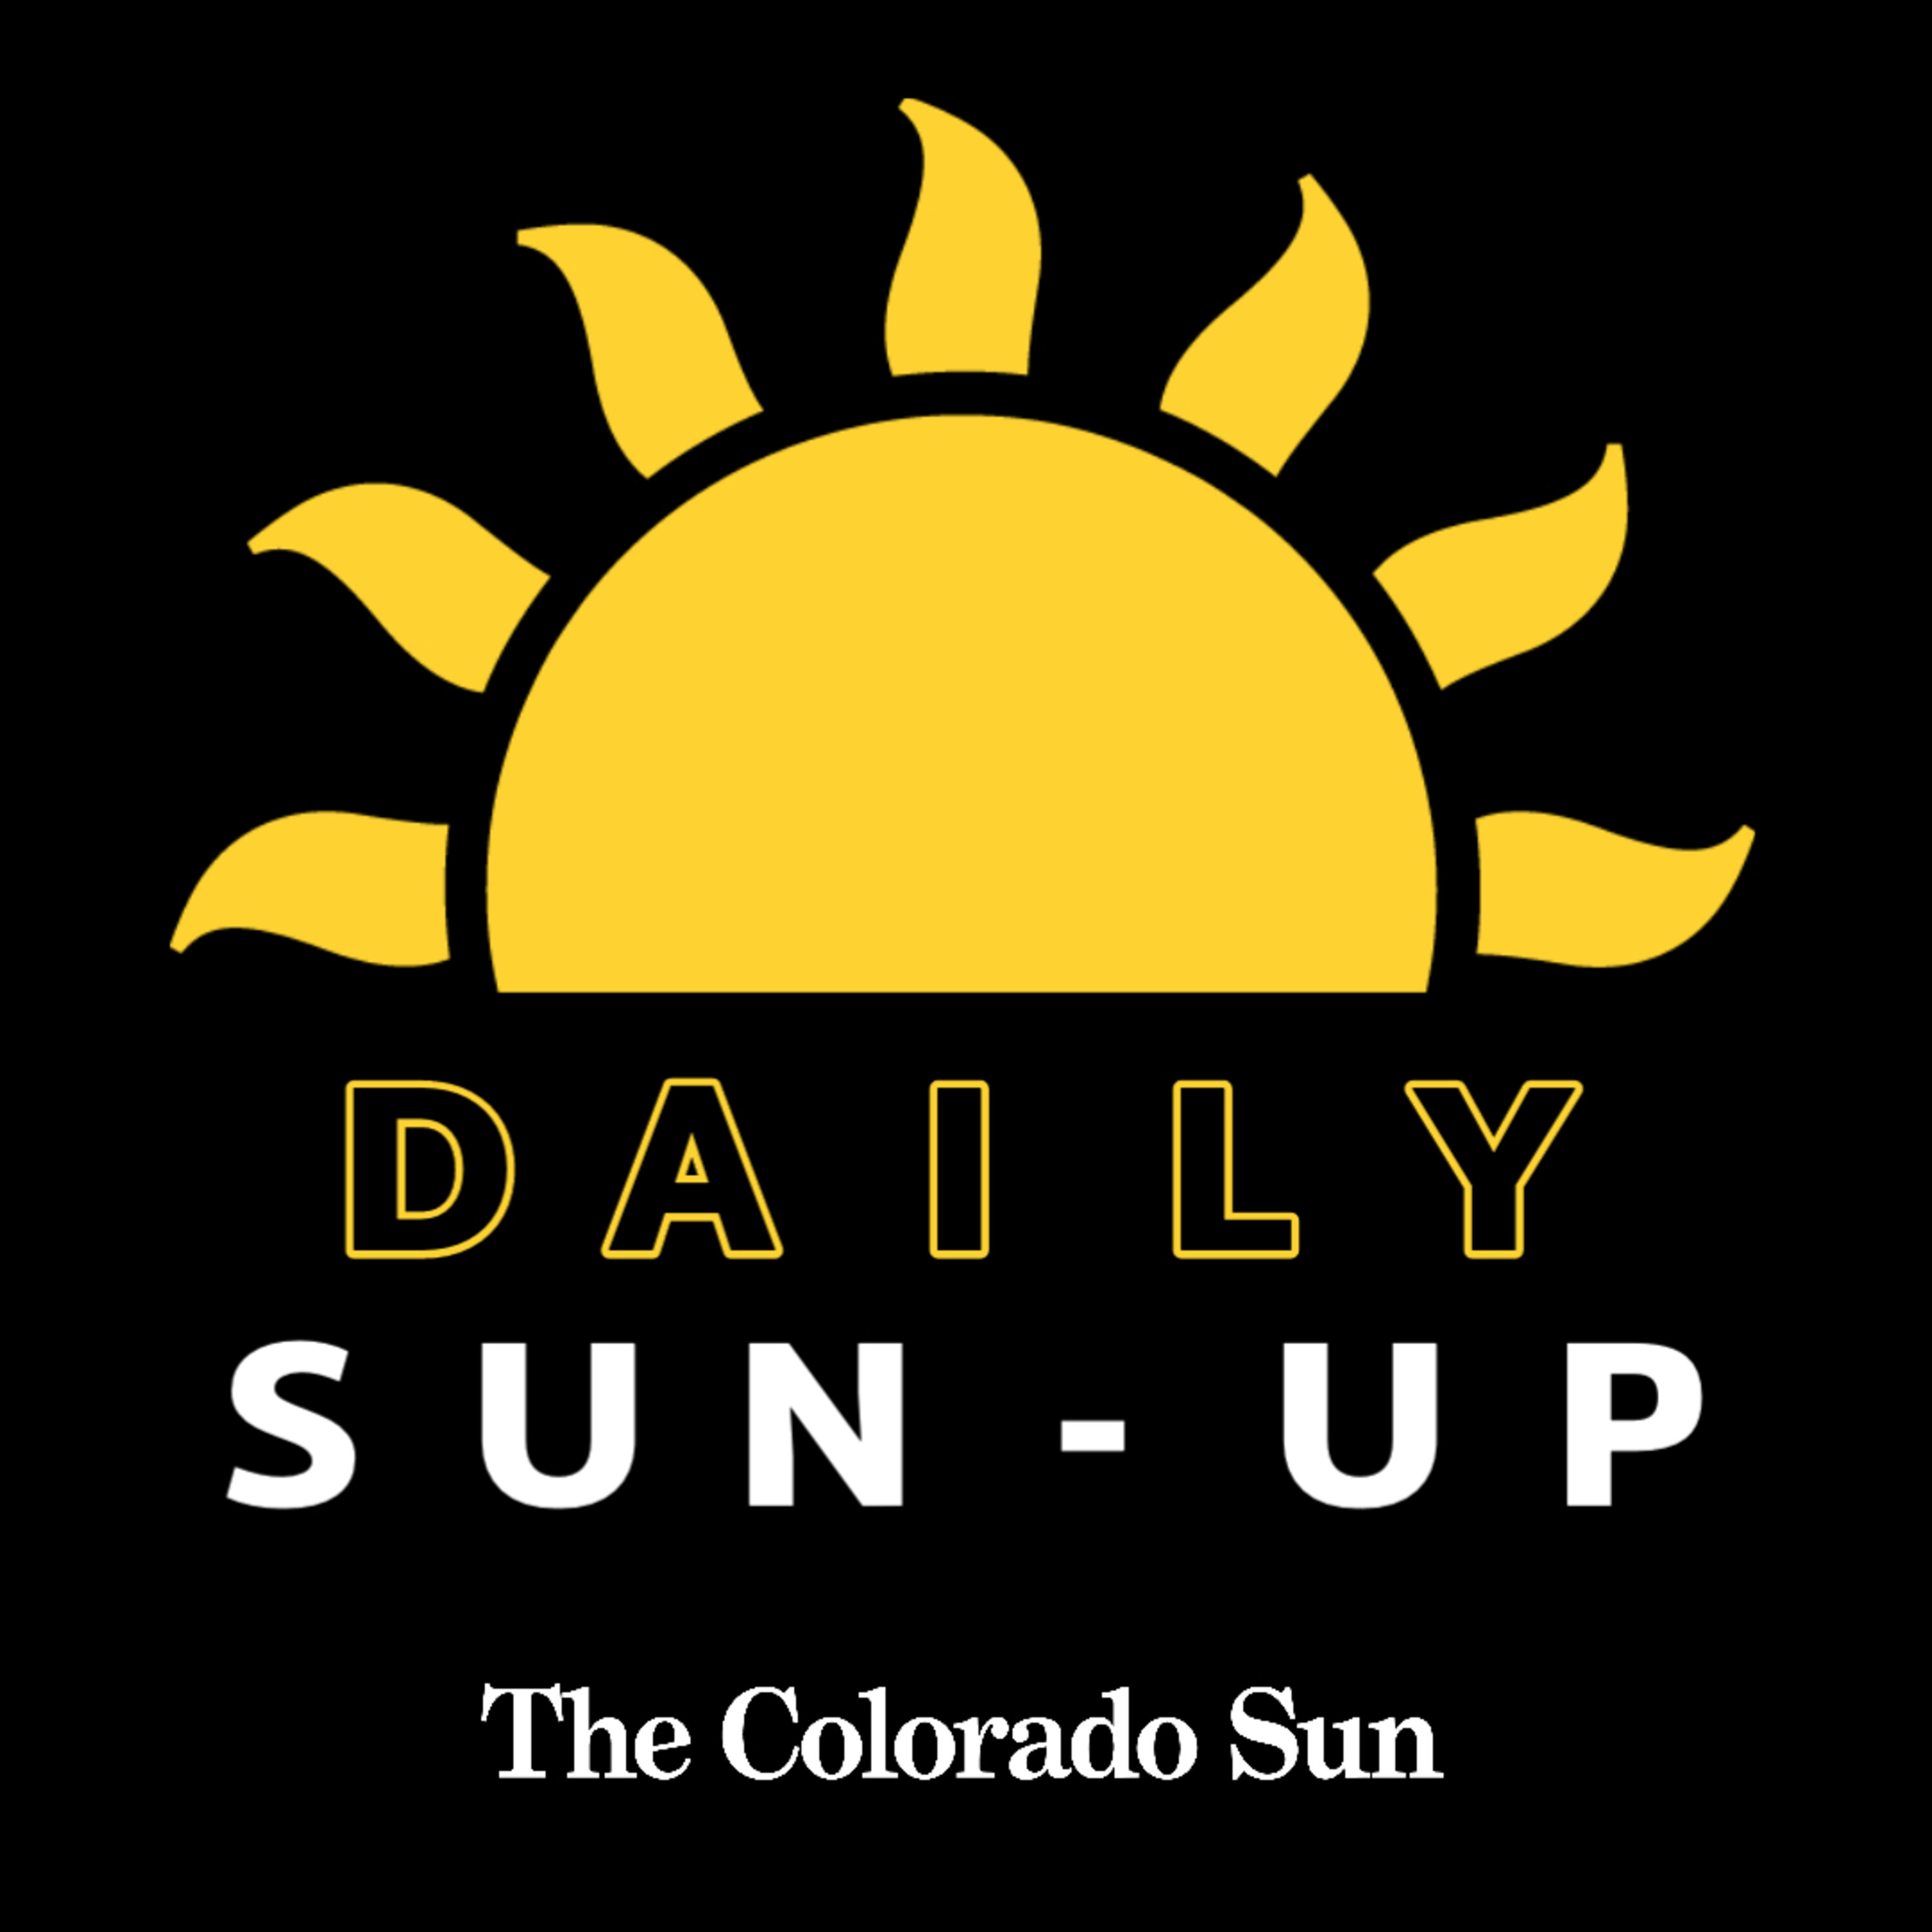 The Colorado Sun Daily Sun-Up: A Pandemic Year - How lifestyles and relationships changed